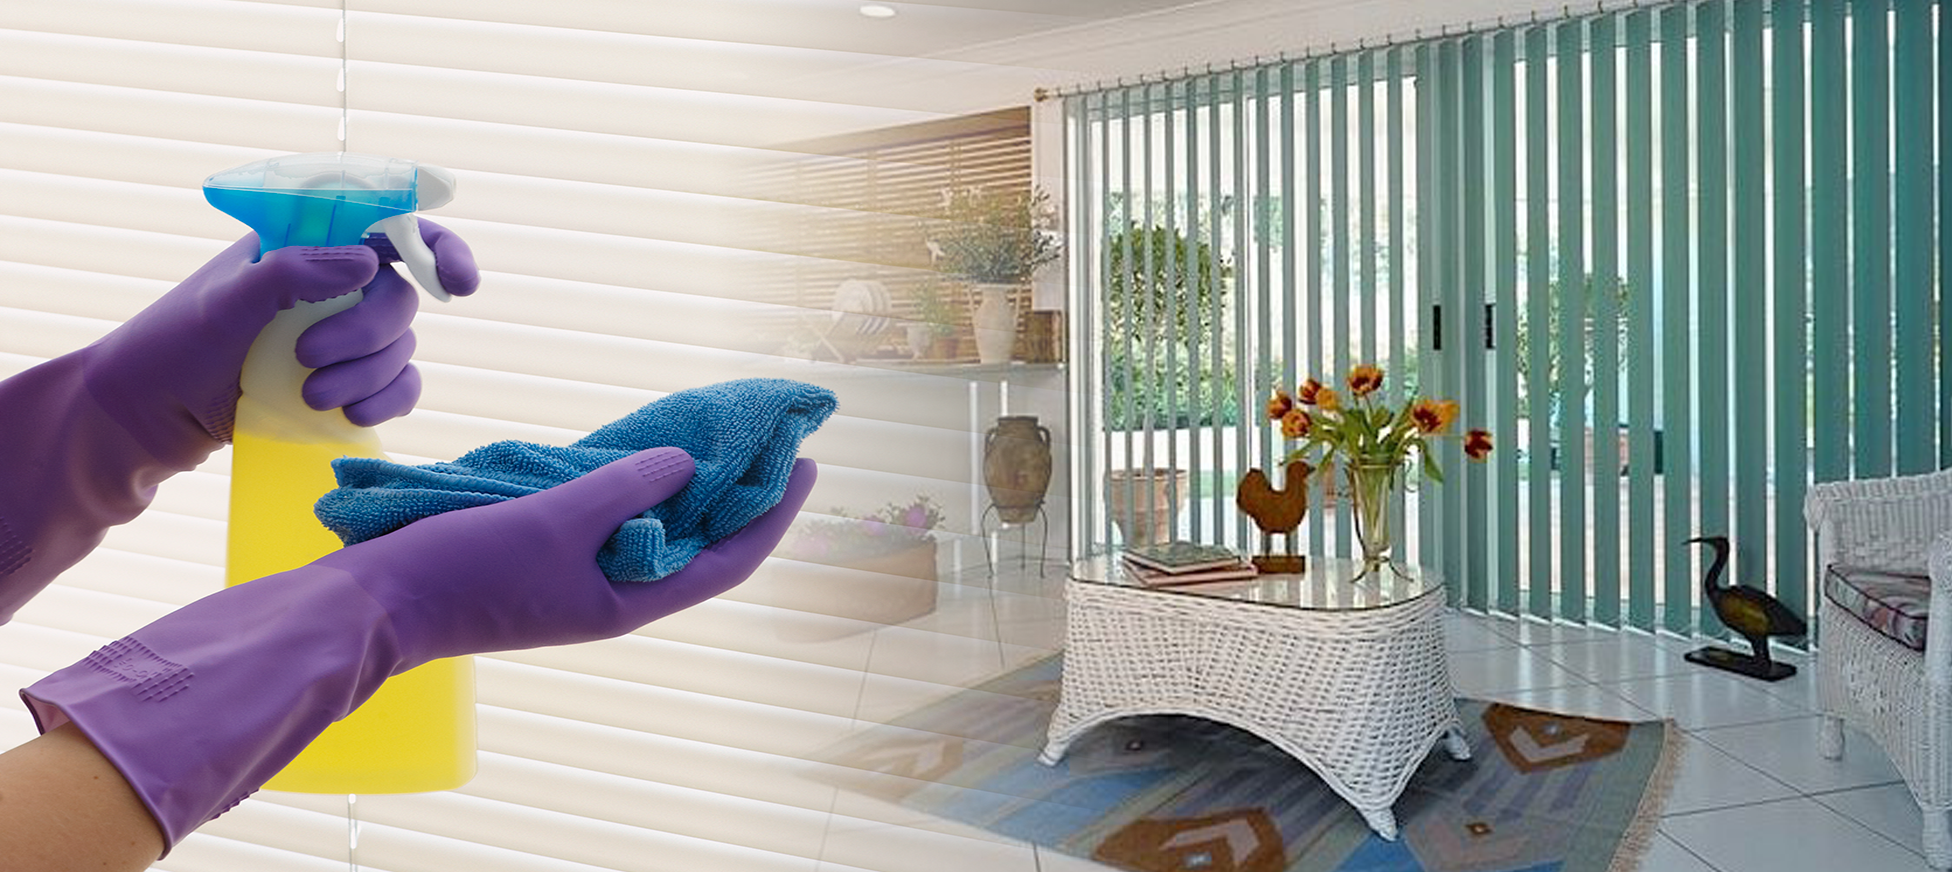 How To Clean Venetian Blinds